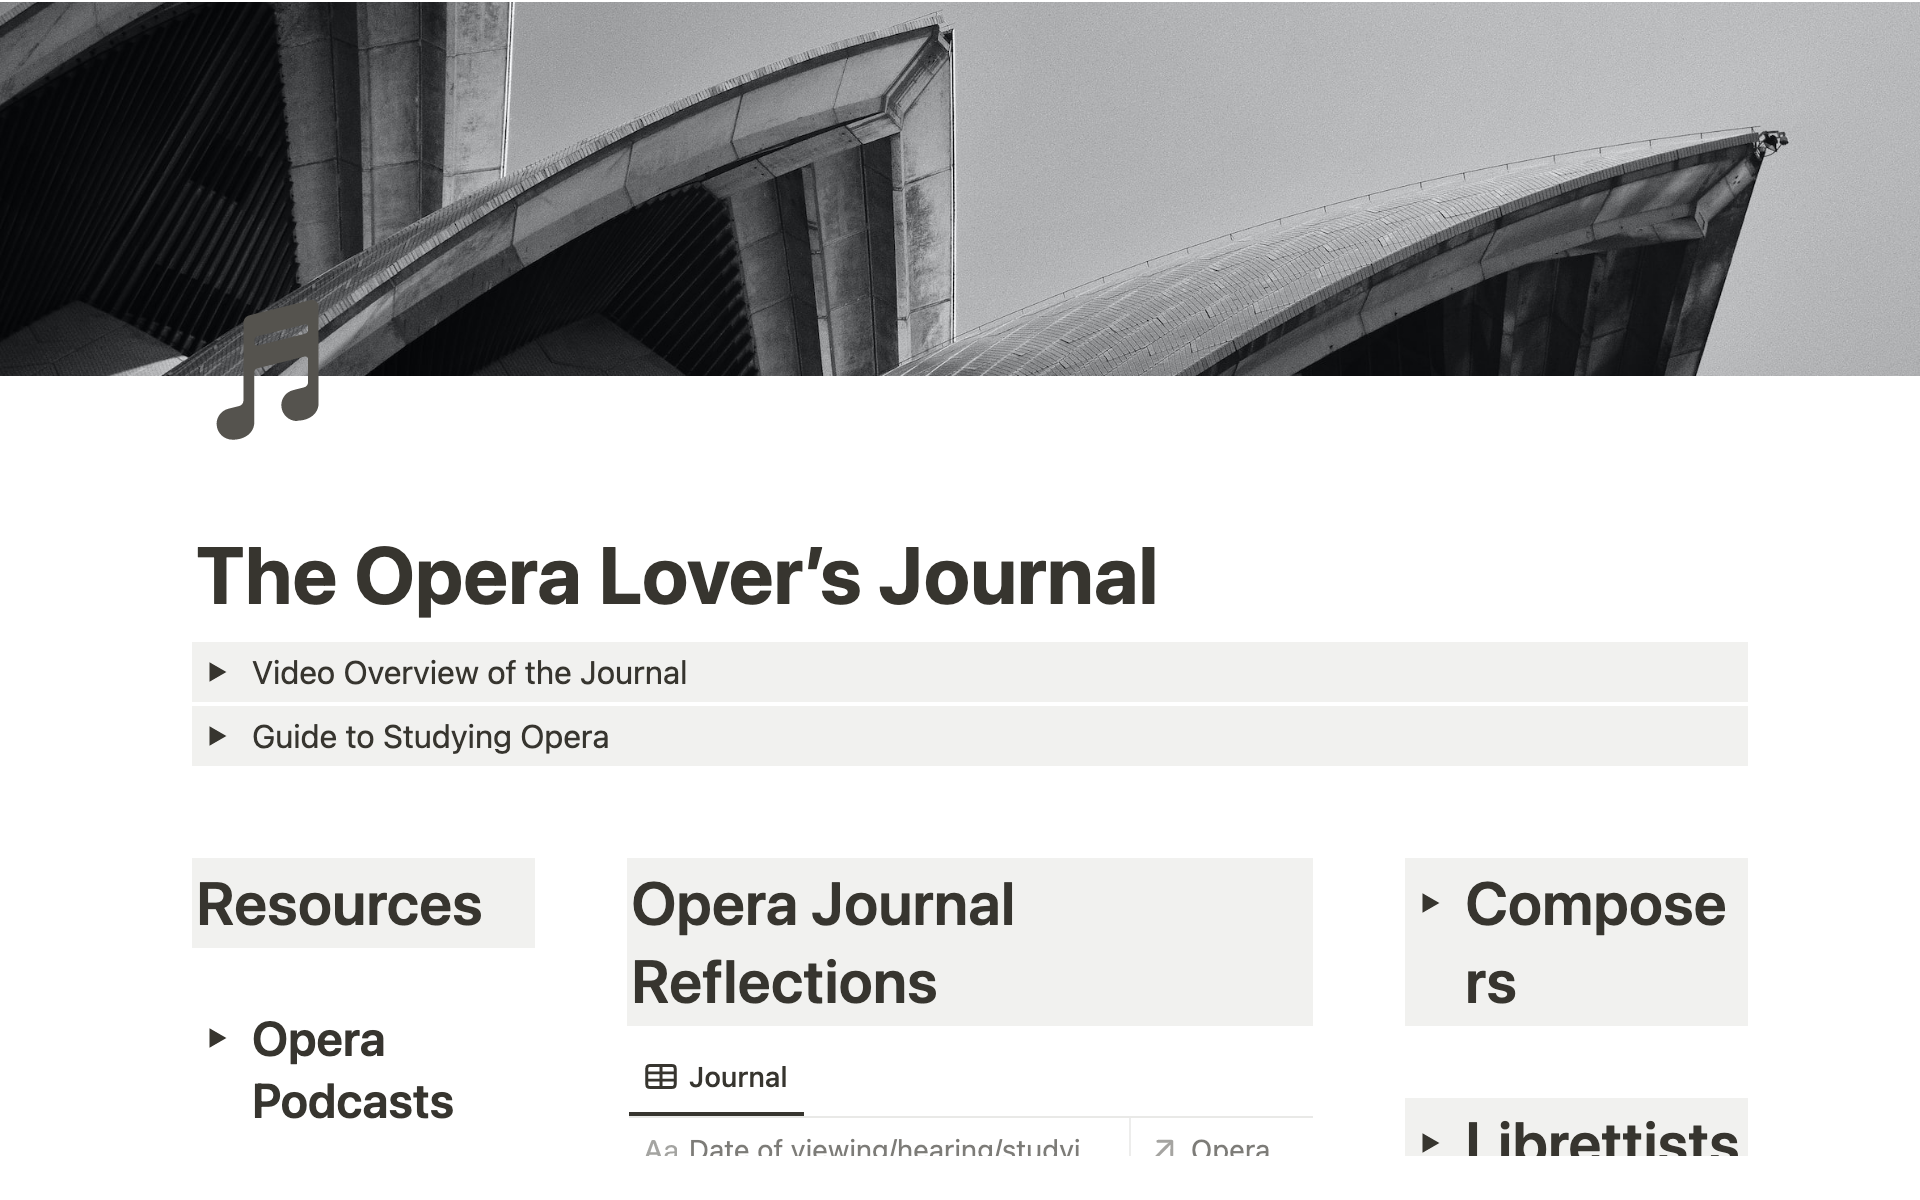 Improve your opera-going experience in a way you've never thought possible with this lightweight digital opera lover’s journal developed for Notion.